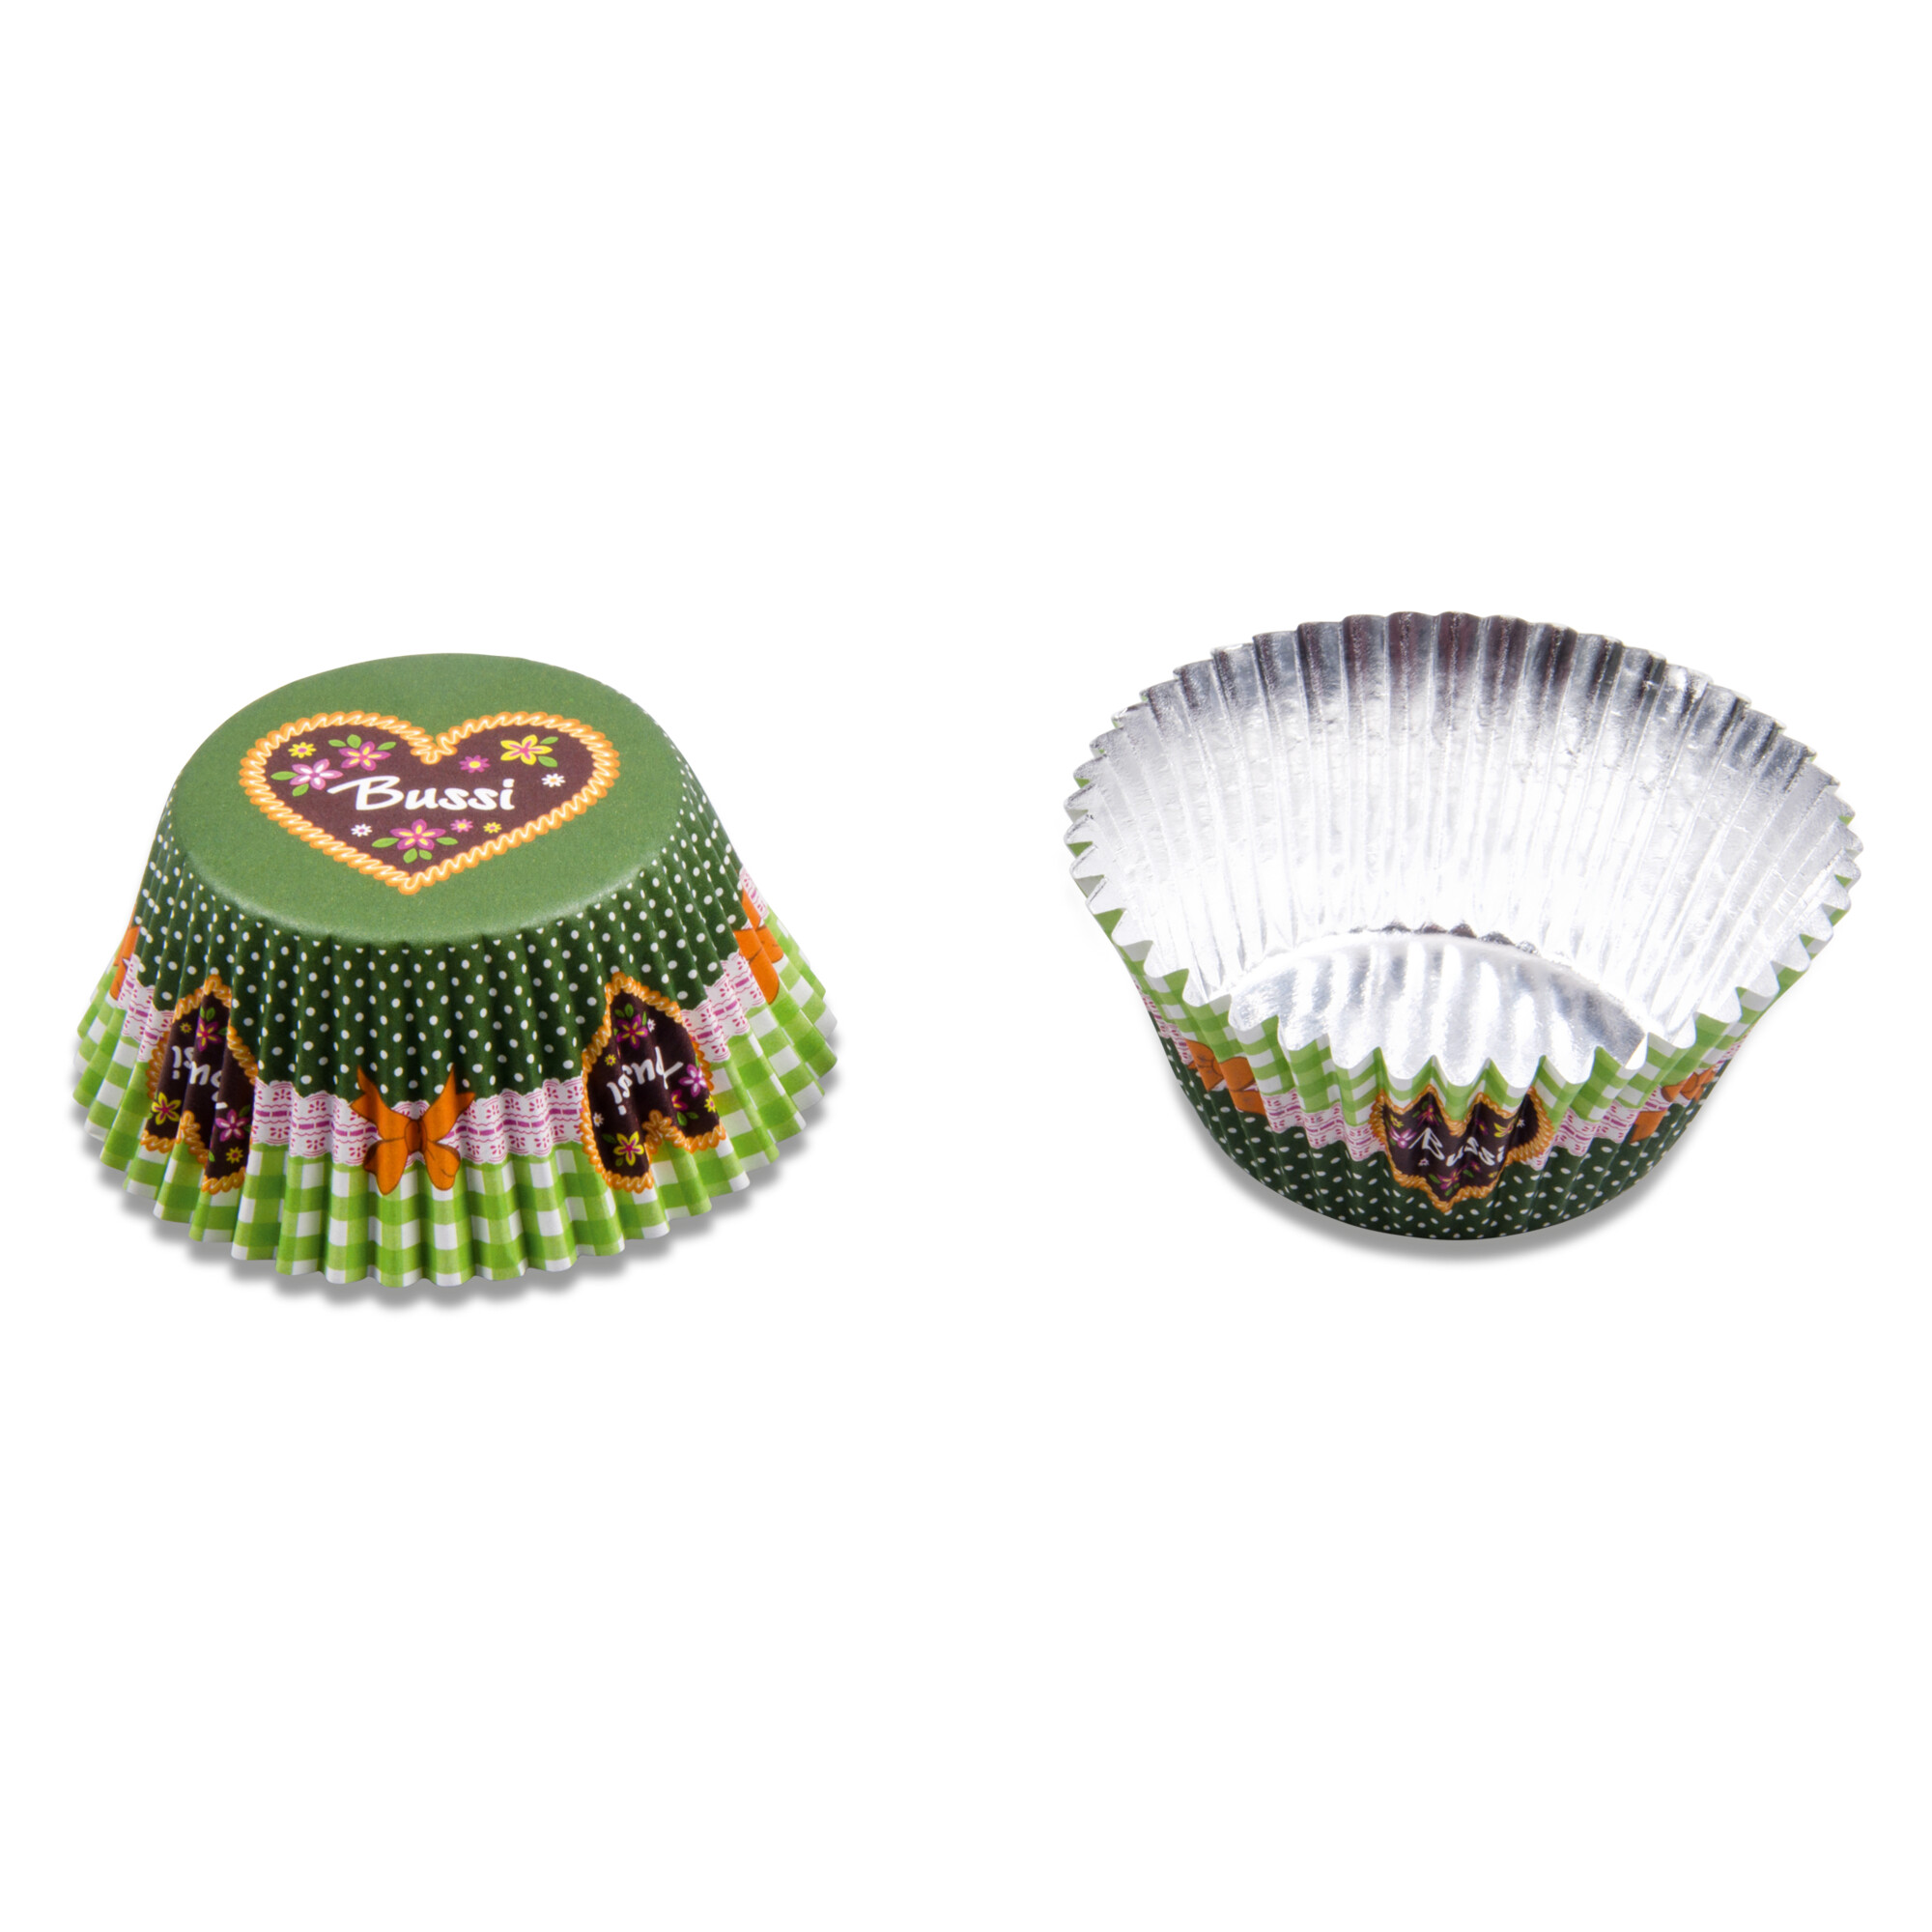 Paper cupcake liners – Bussi / Kiss – 50 pieces